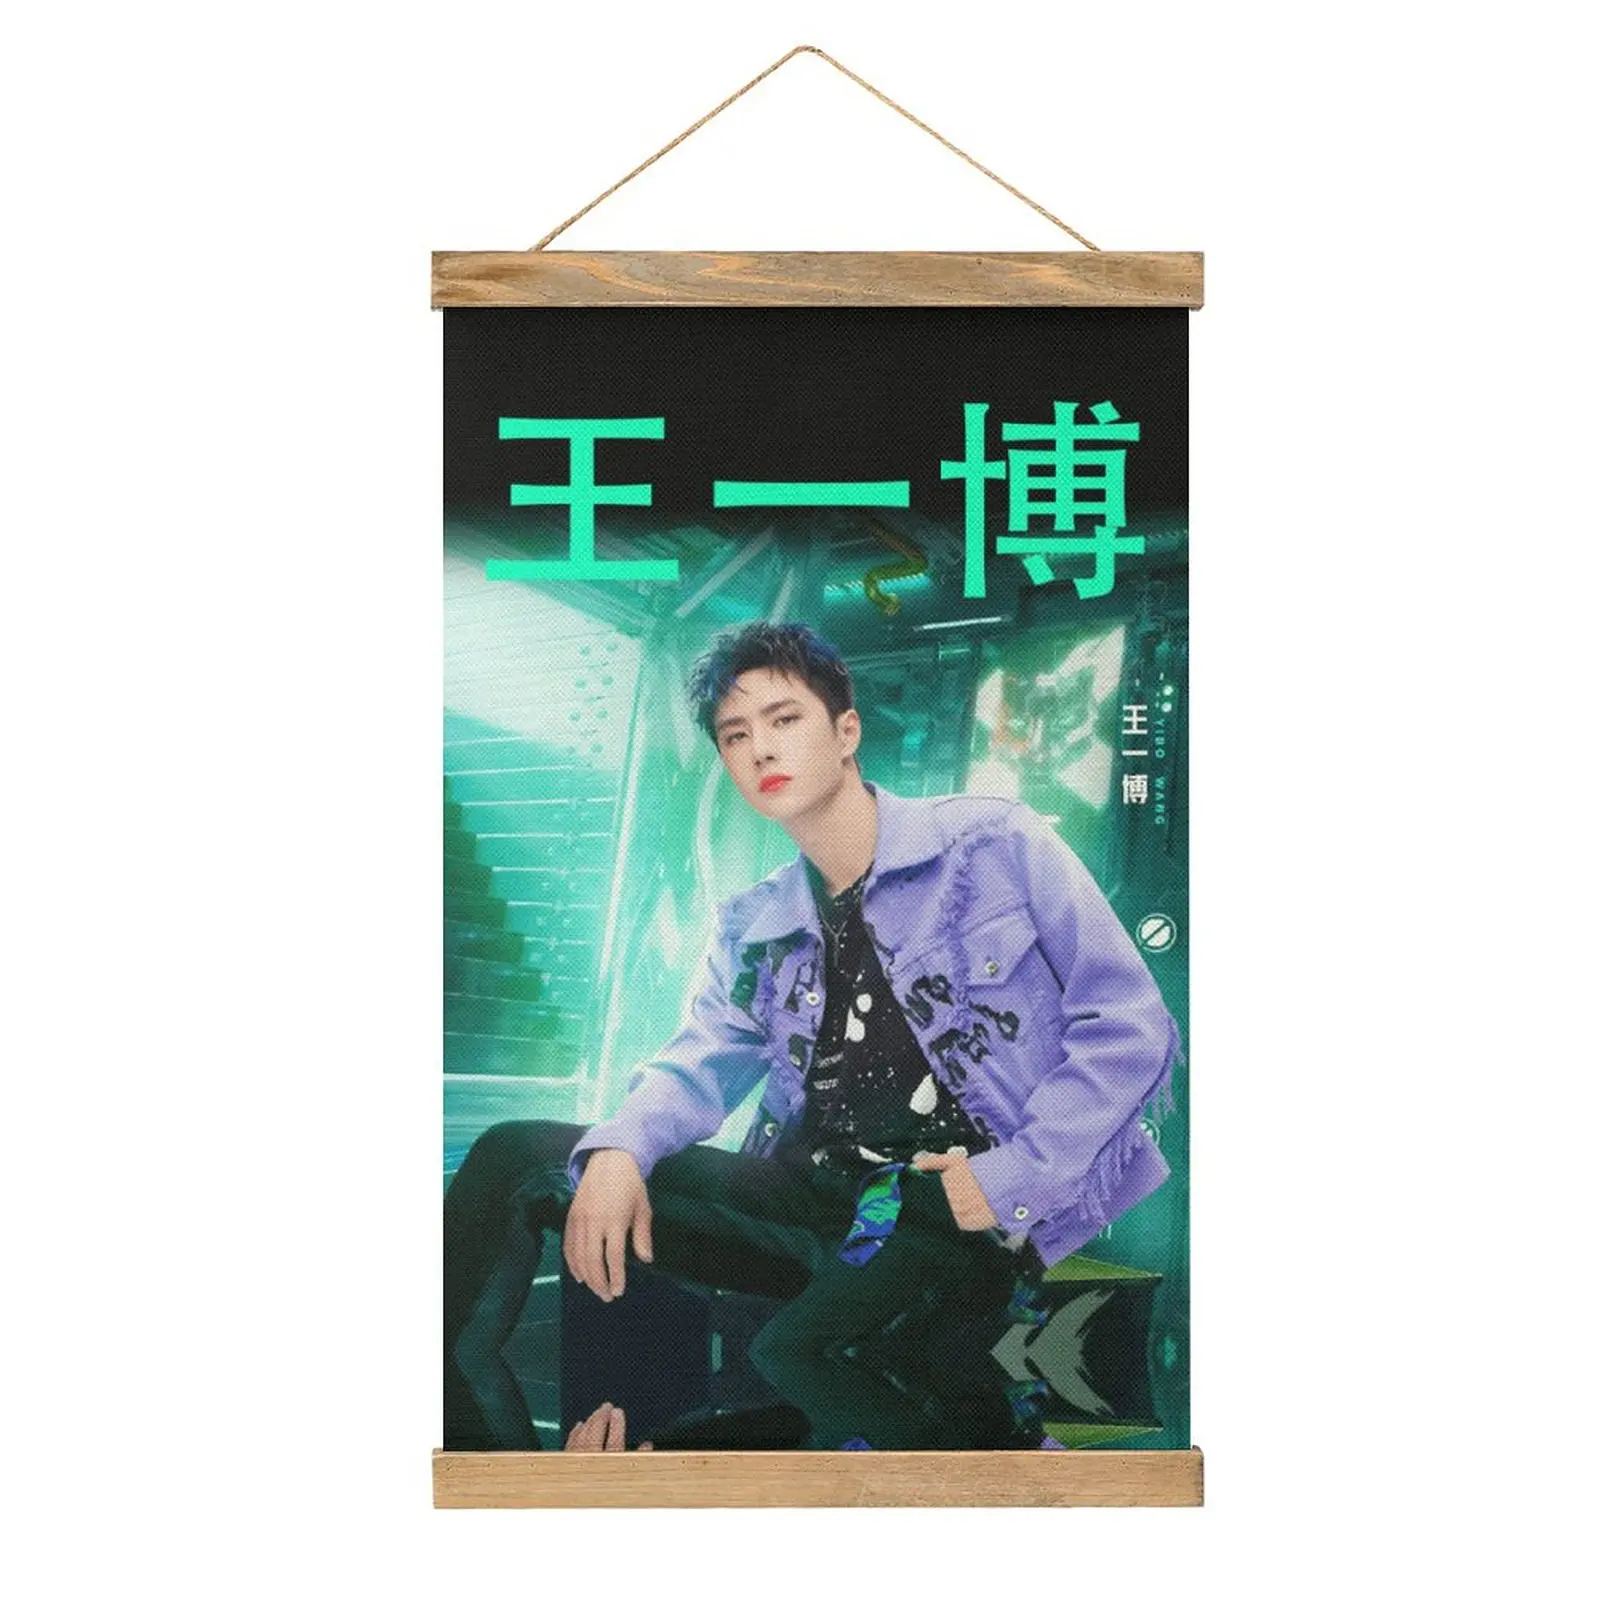 

The Untamed Wang Yibo SDC3 Essential Draw Restaurant Craft Decoration Canvas Hanging Picture Vintage Funny Novelty Style Decorat